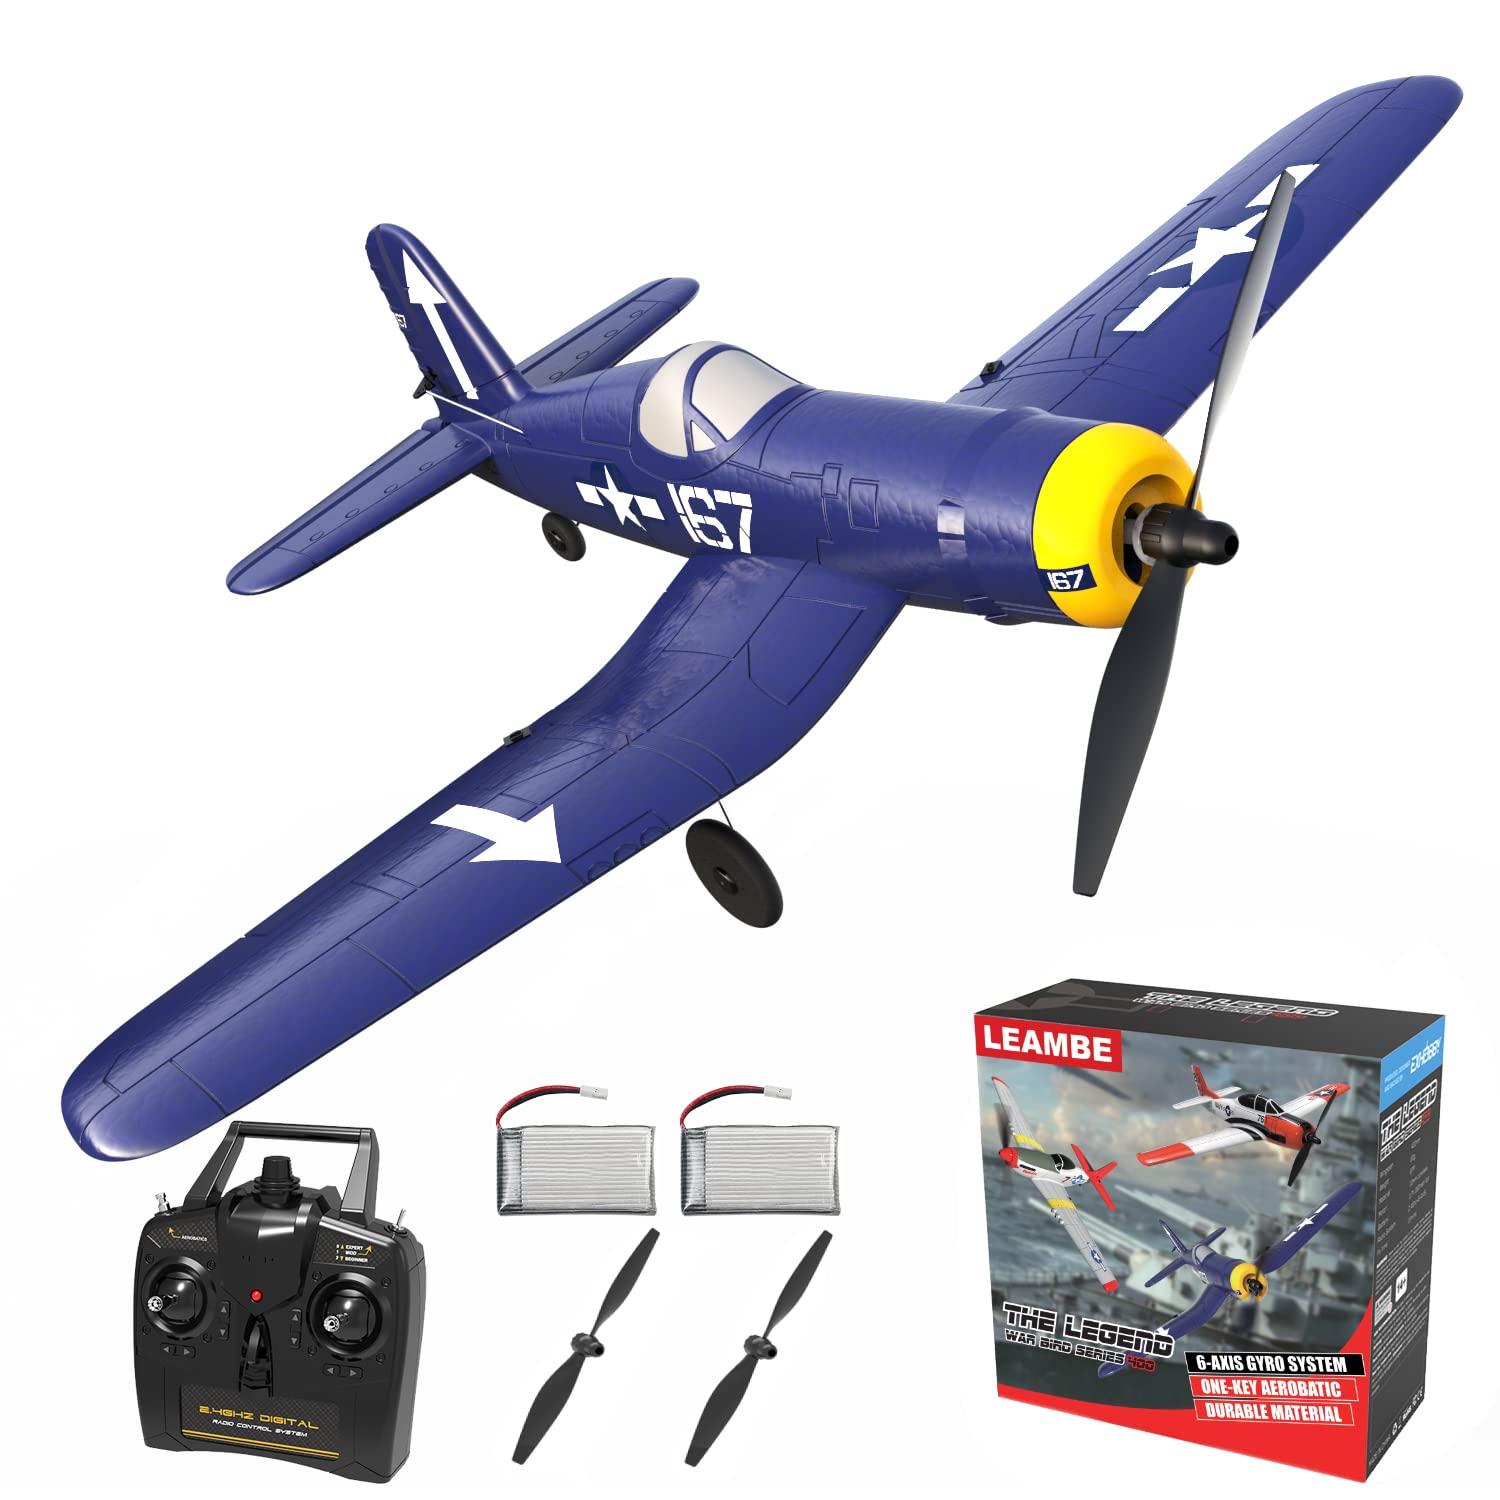 Cheap Remote Control Planes: Expert tips for flying your cheap remote control plane